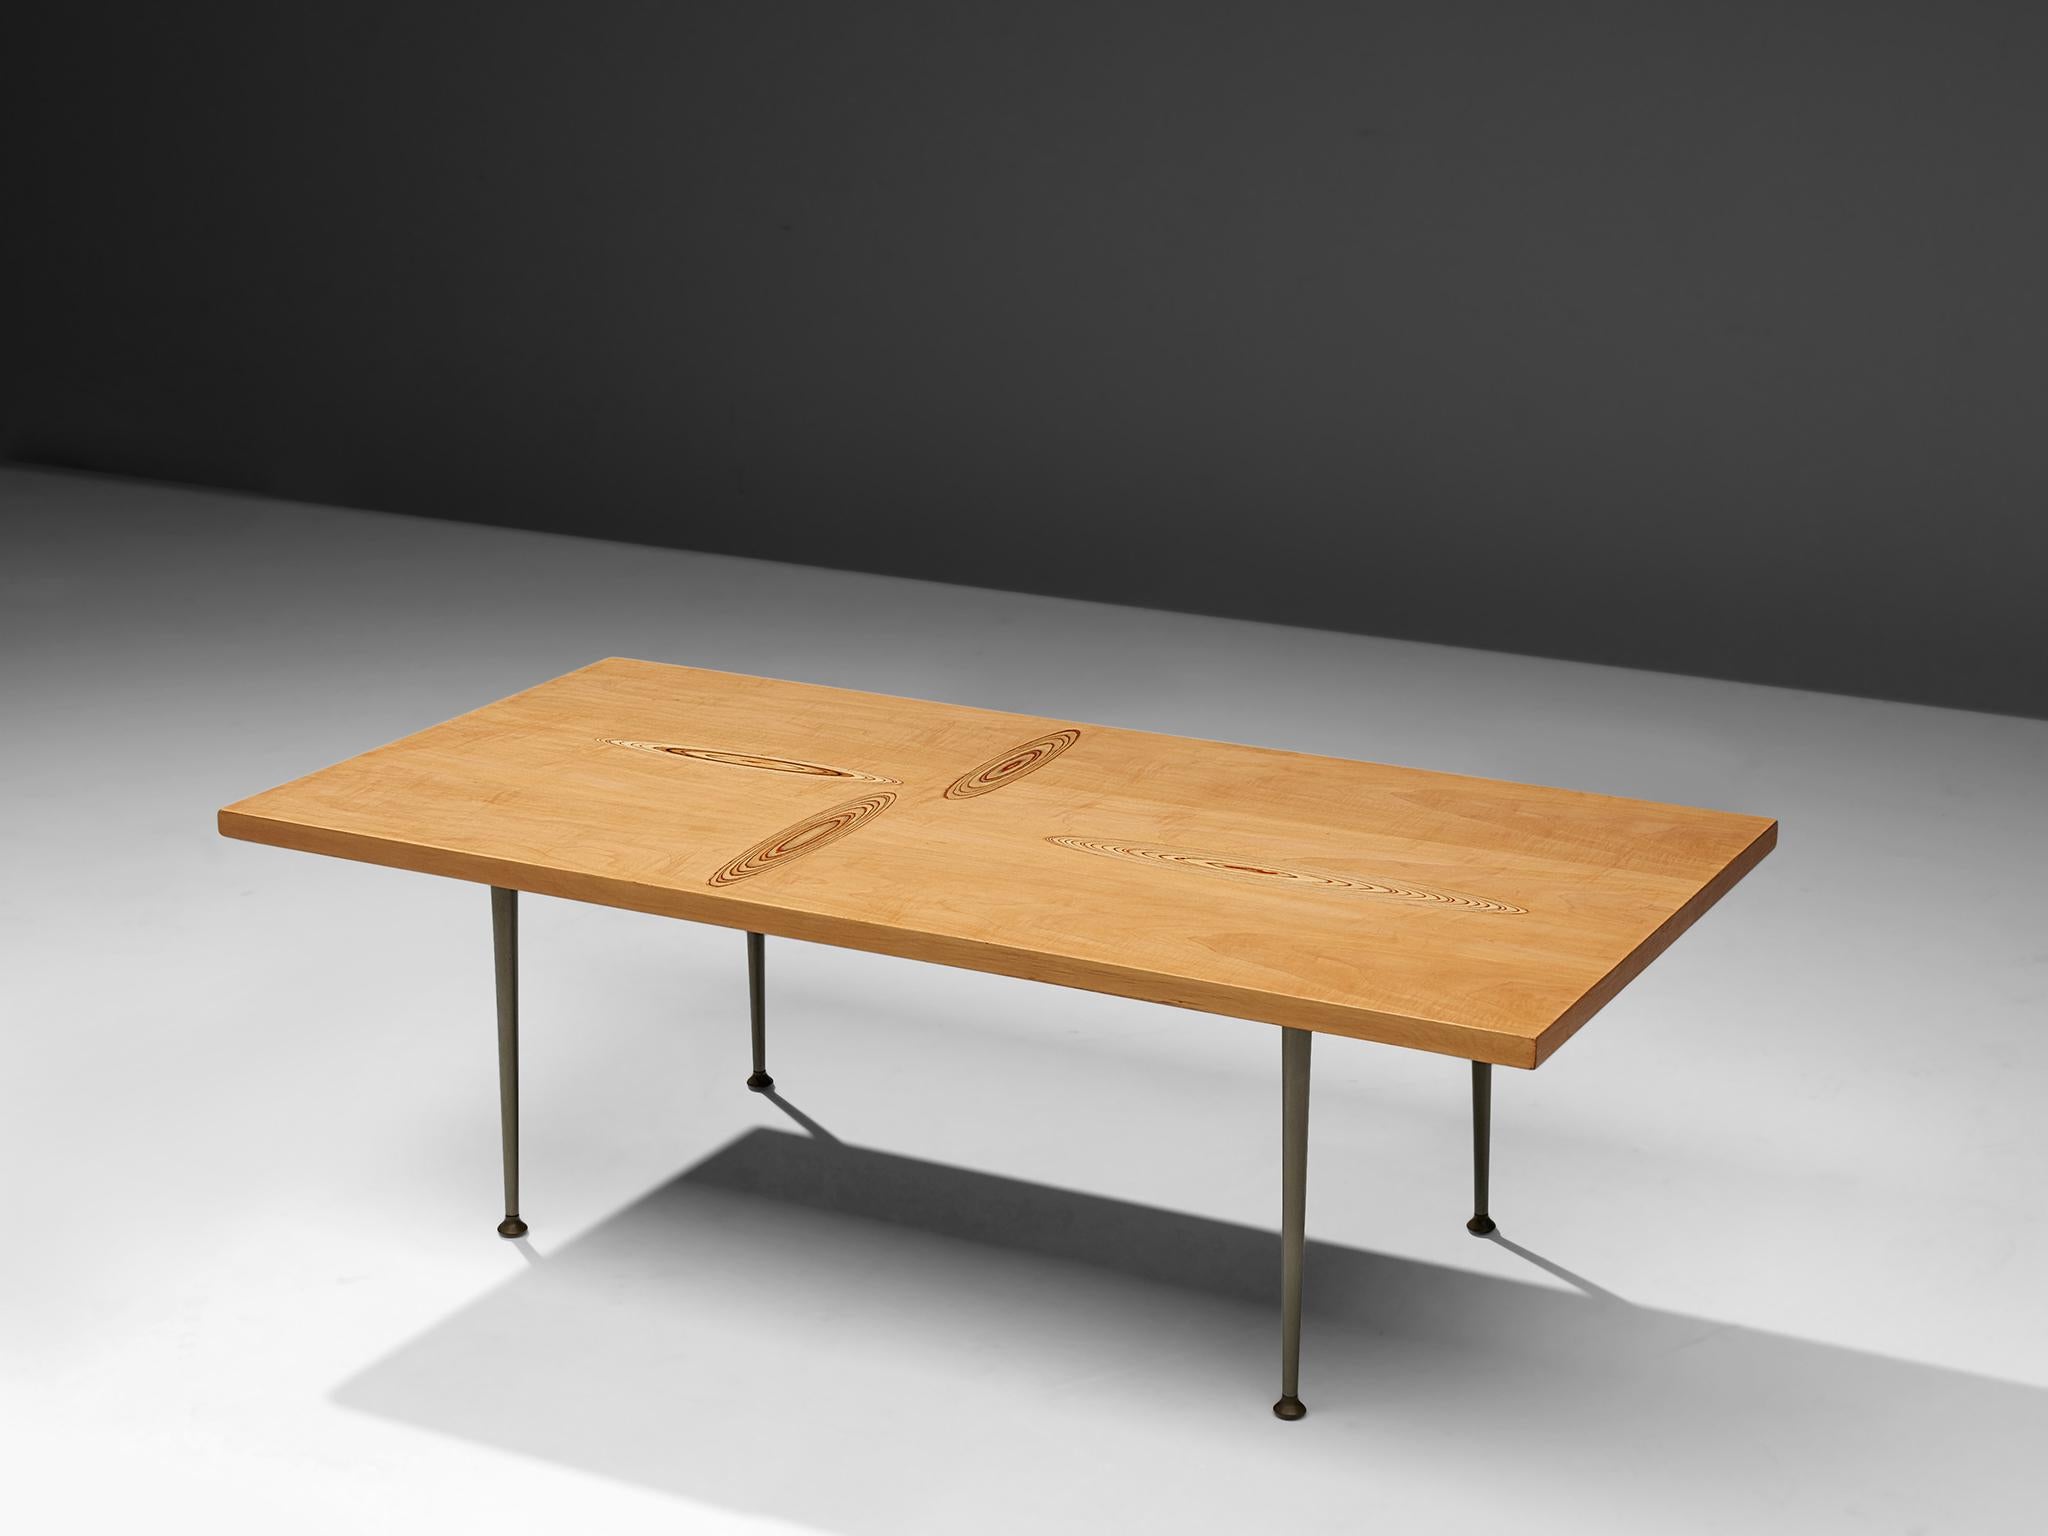 Tapio Wirkkala for Asko, cocktail table in birchwood and metal, Finland, 1960s. 

Coffee table with wooden inlay ornaments designed by Tapio Wirkala. The table is produced by Asko. This coffee table is one of Wirkkala's iconic furniture designs.